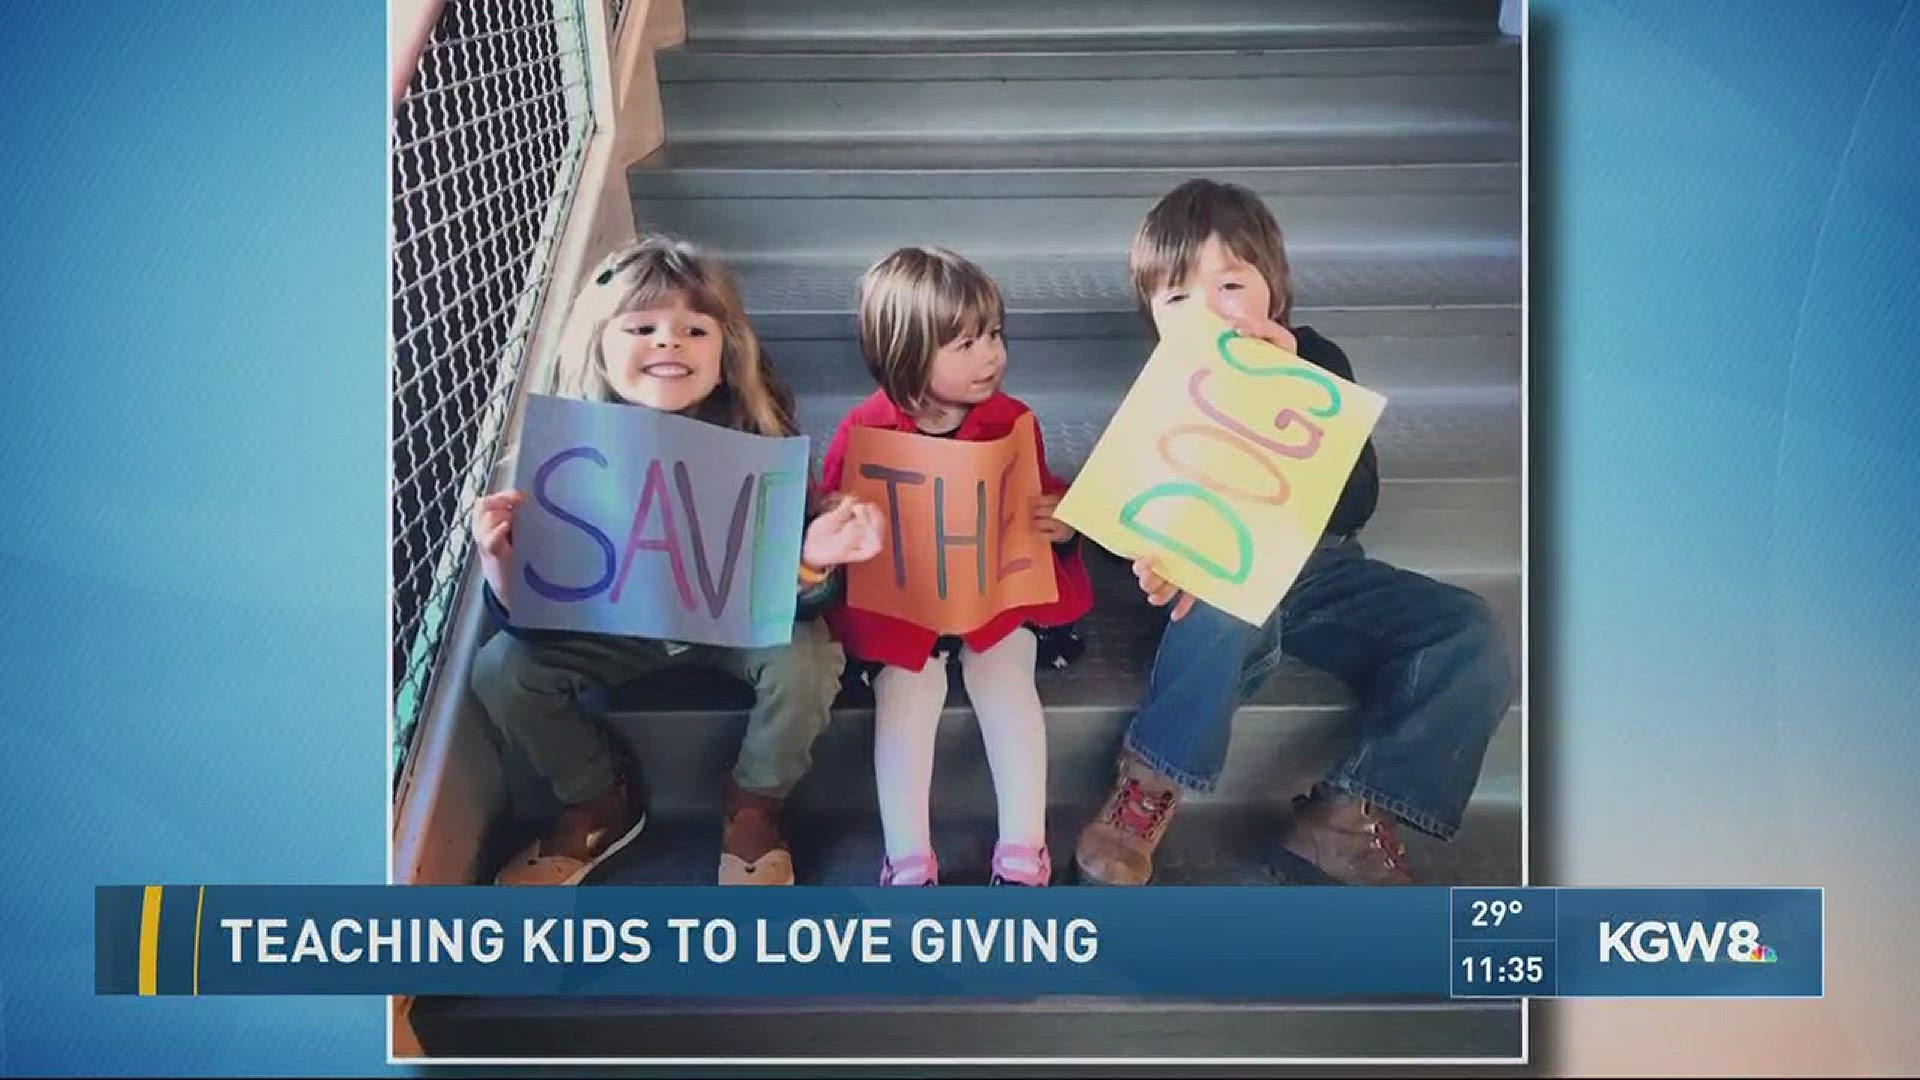 The art of teaching kids to love giving